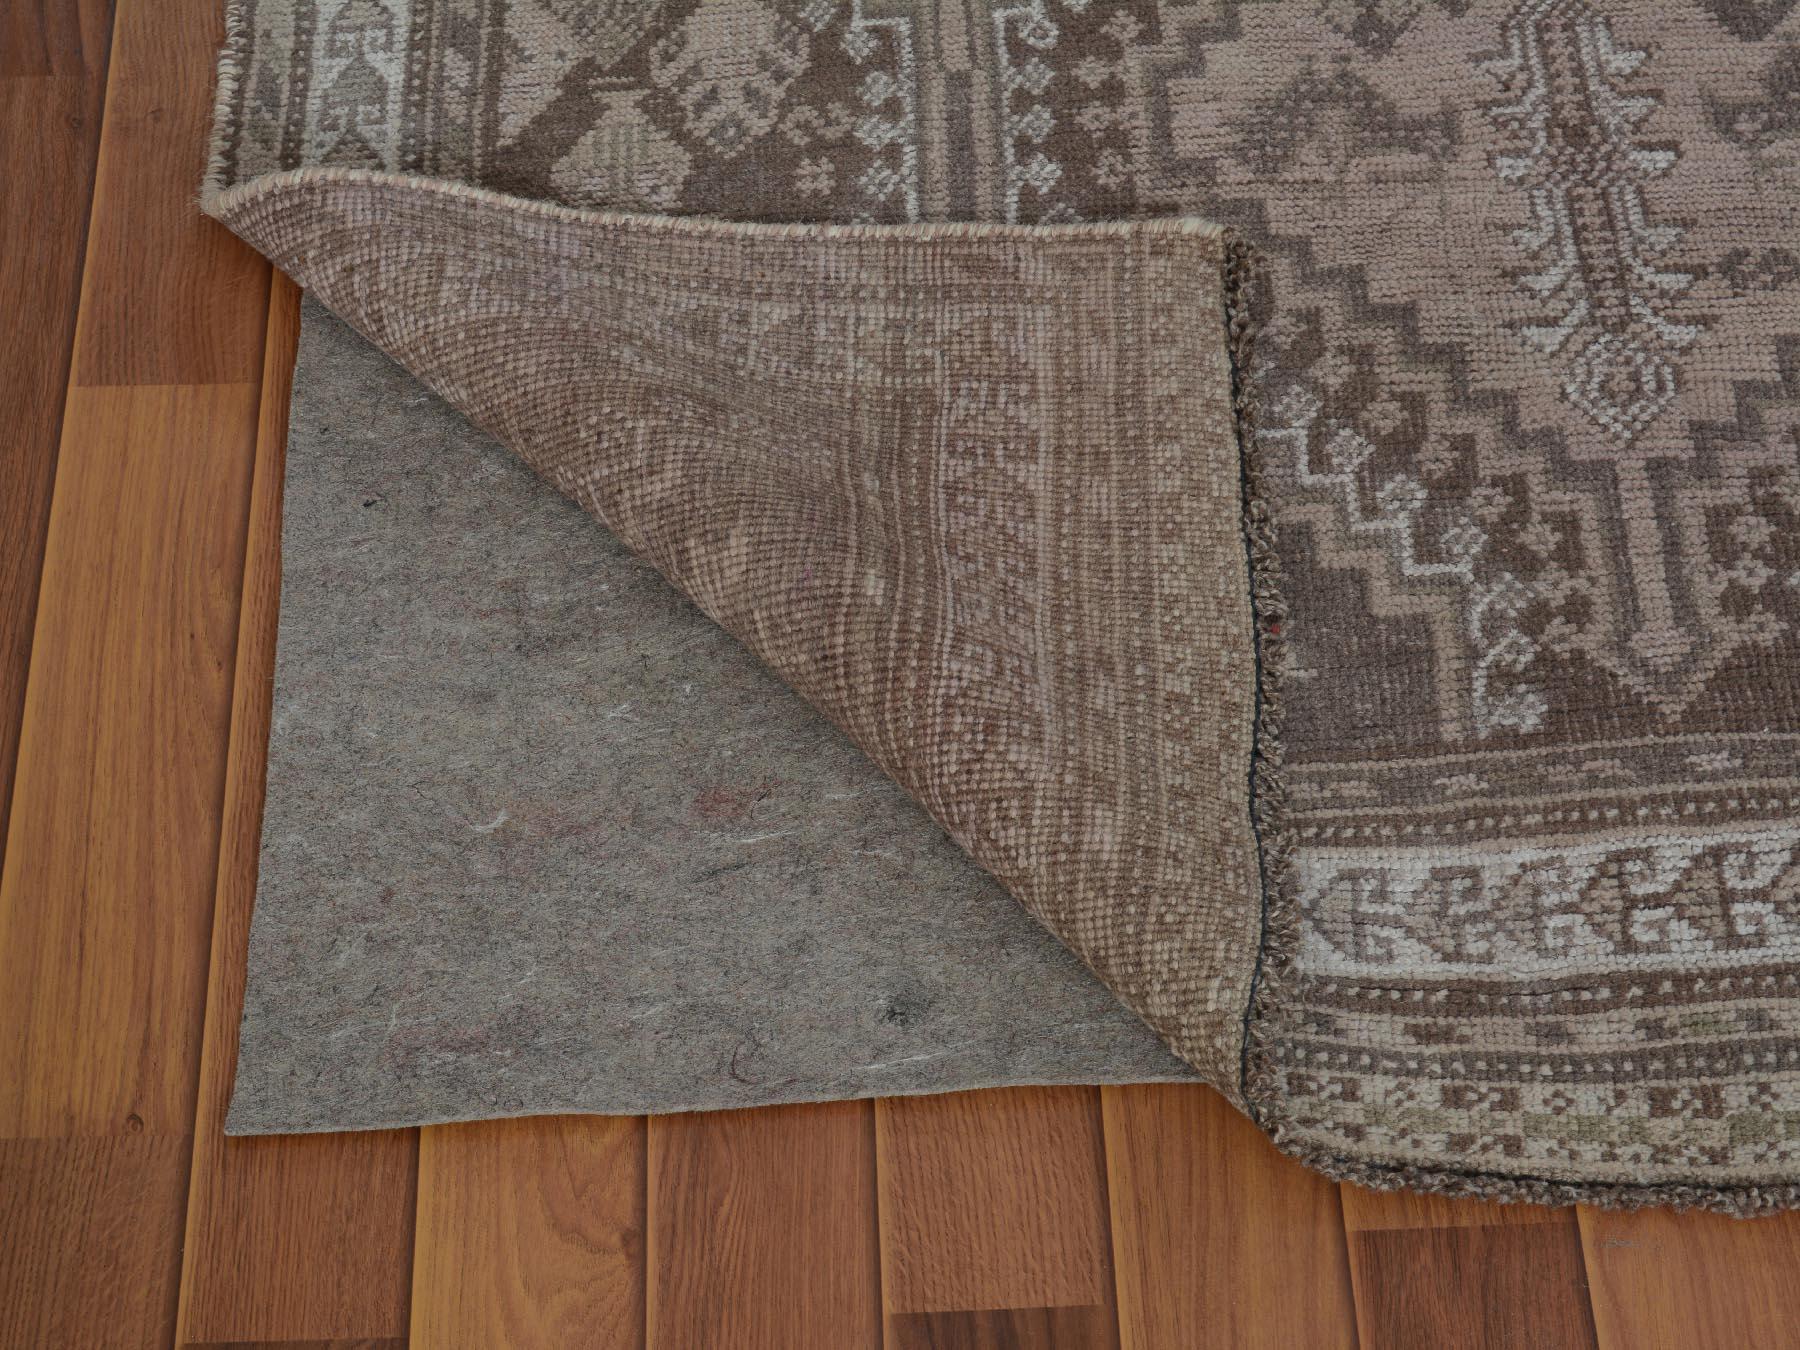 Medieval Earth Tone Colors Vintage and Worn Down Persian Qashqai Pure Wool Rug For Sale